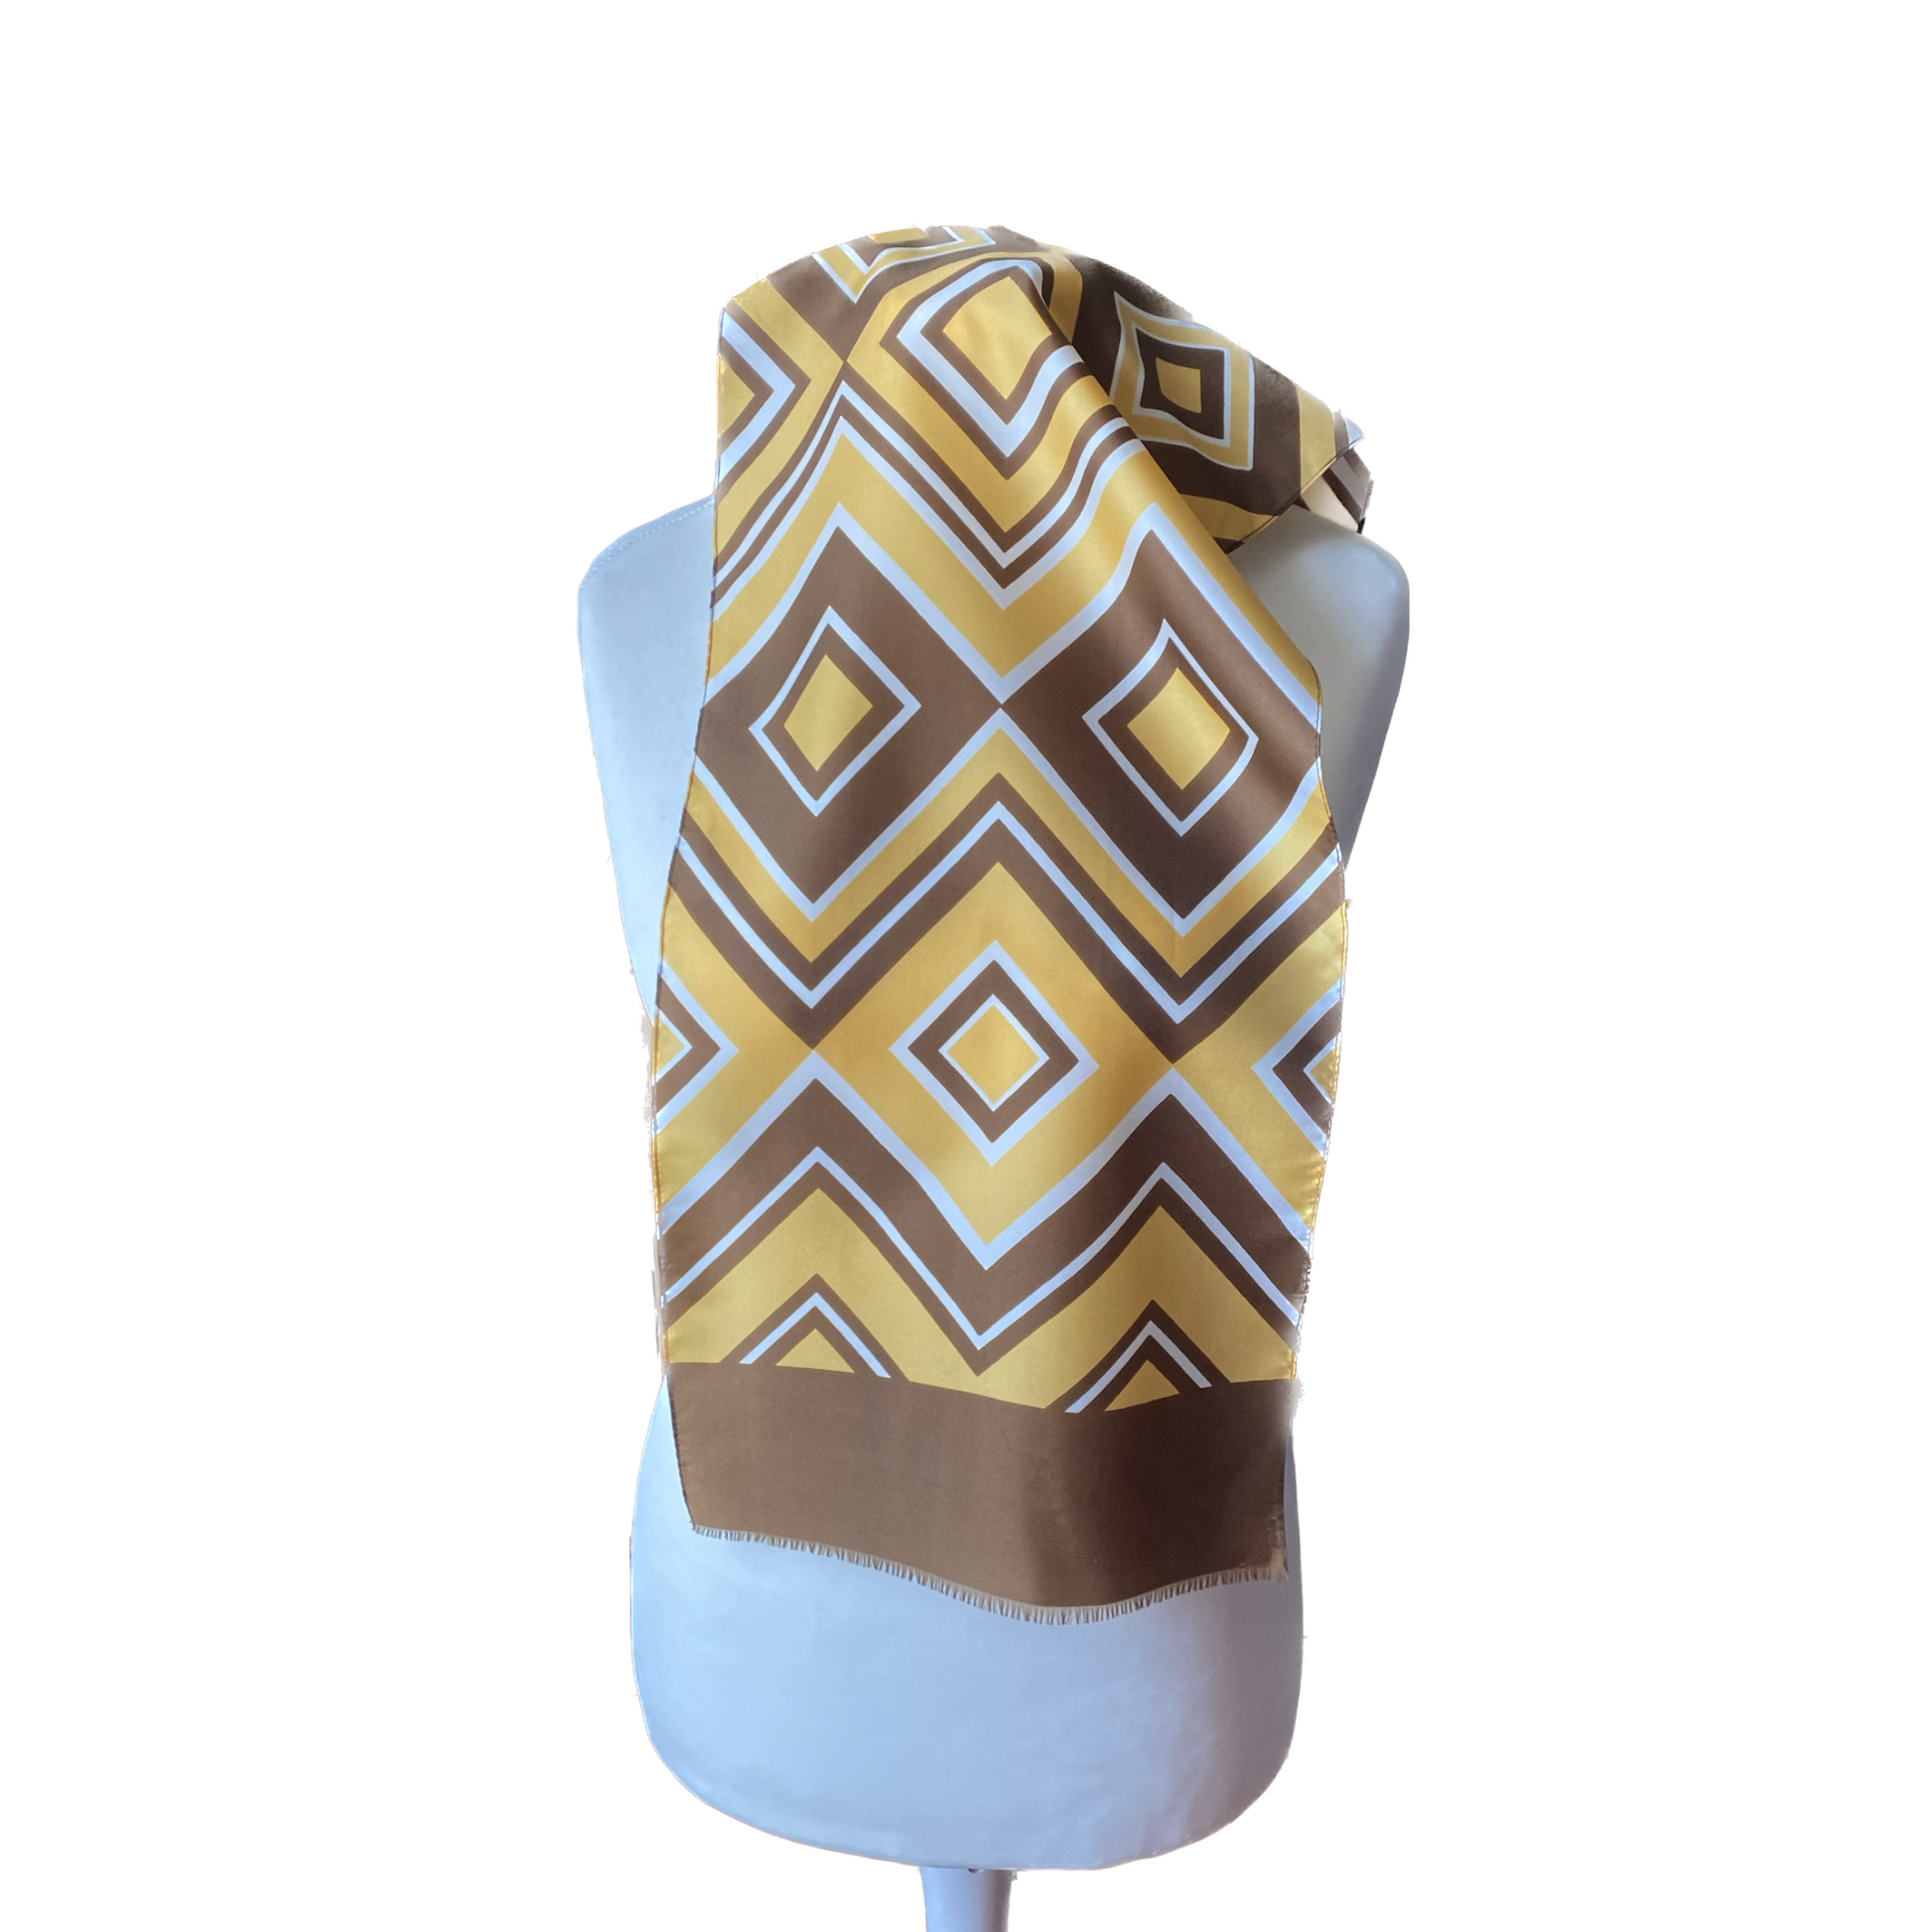 Mustard yellow and white chevron print scarf - Add a pop of color to your ensemble.